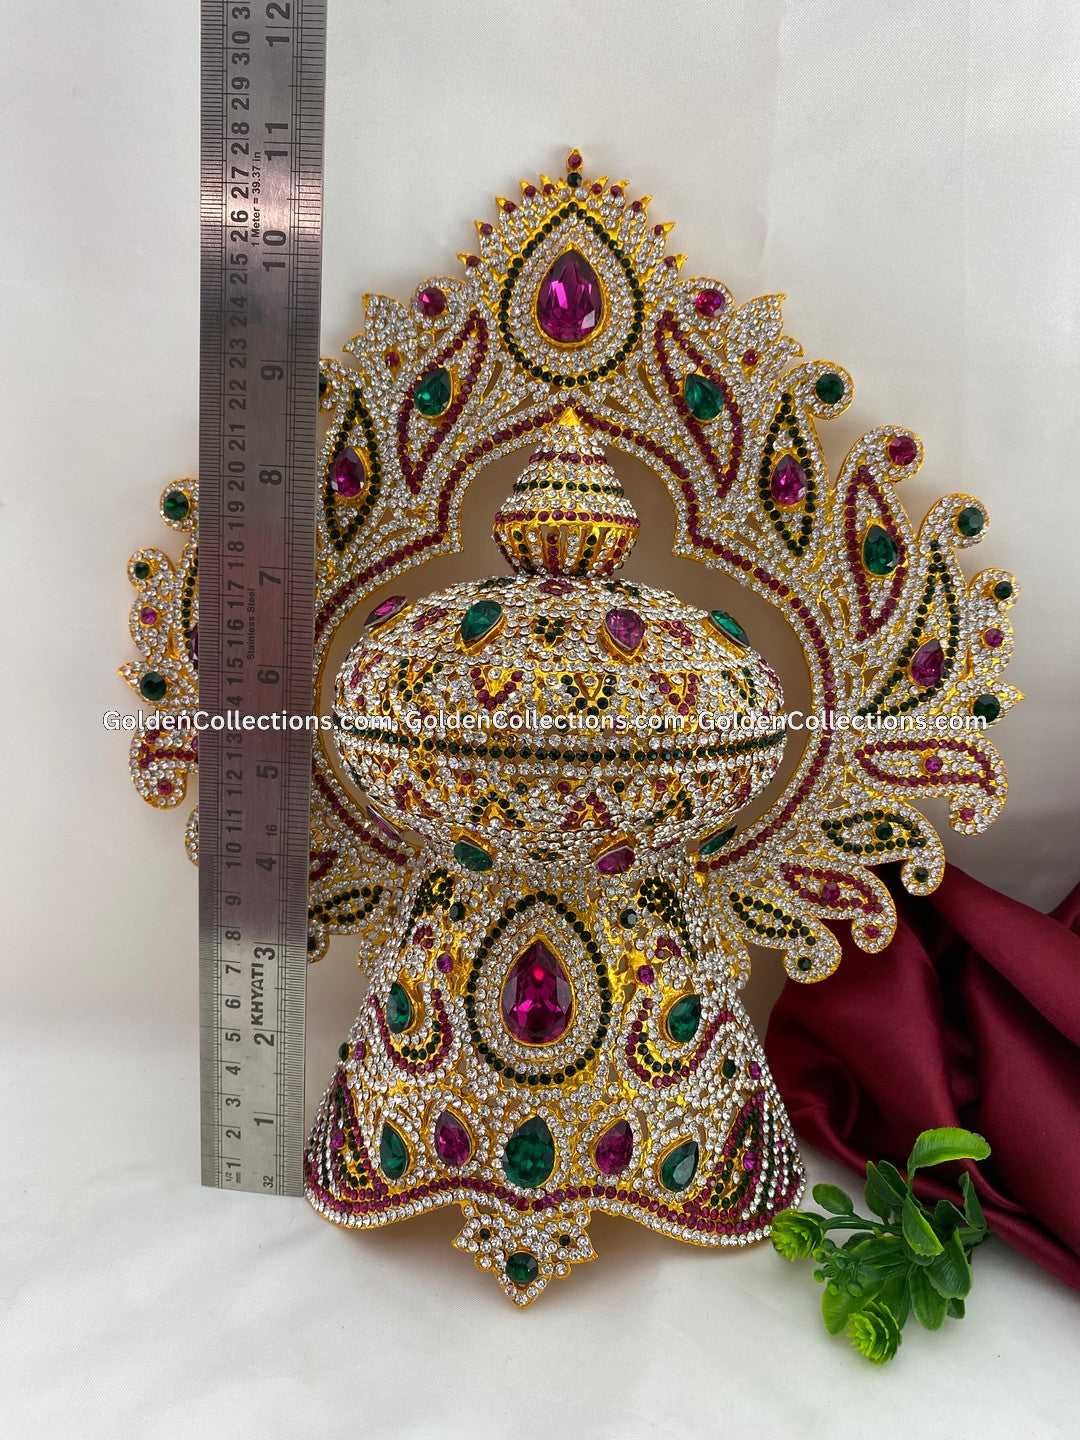 Ornate Crown for Hindu Deity - GoldenCollections DGC-125 2